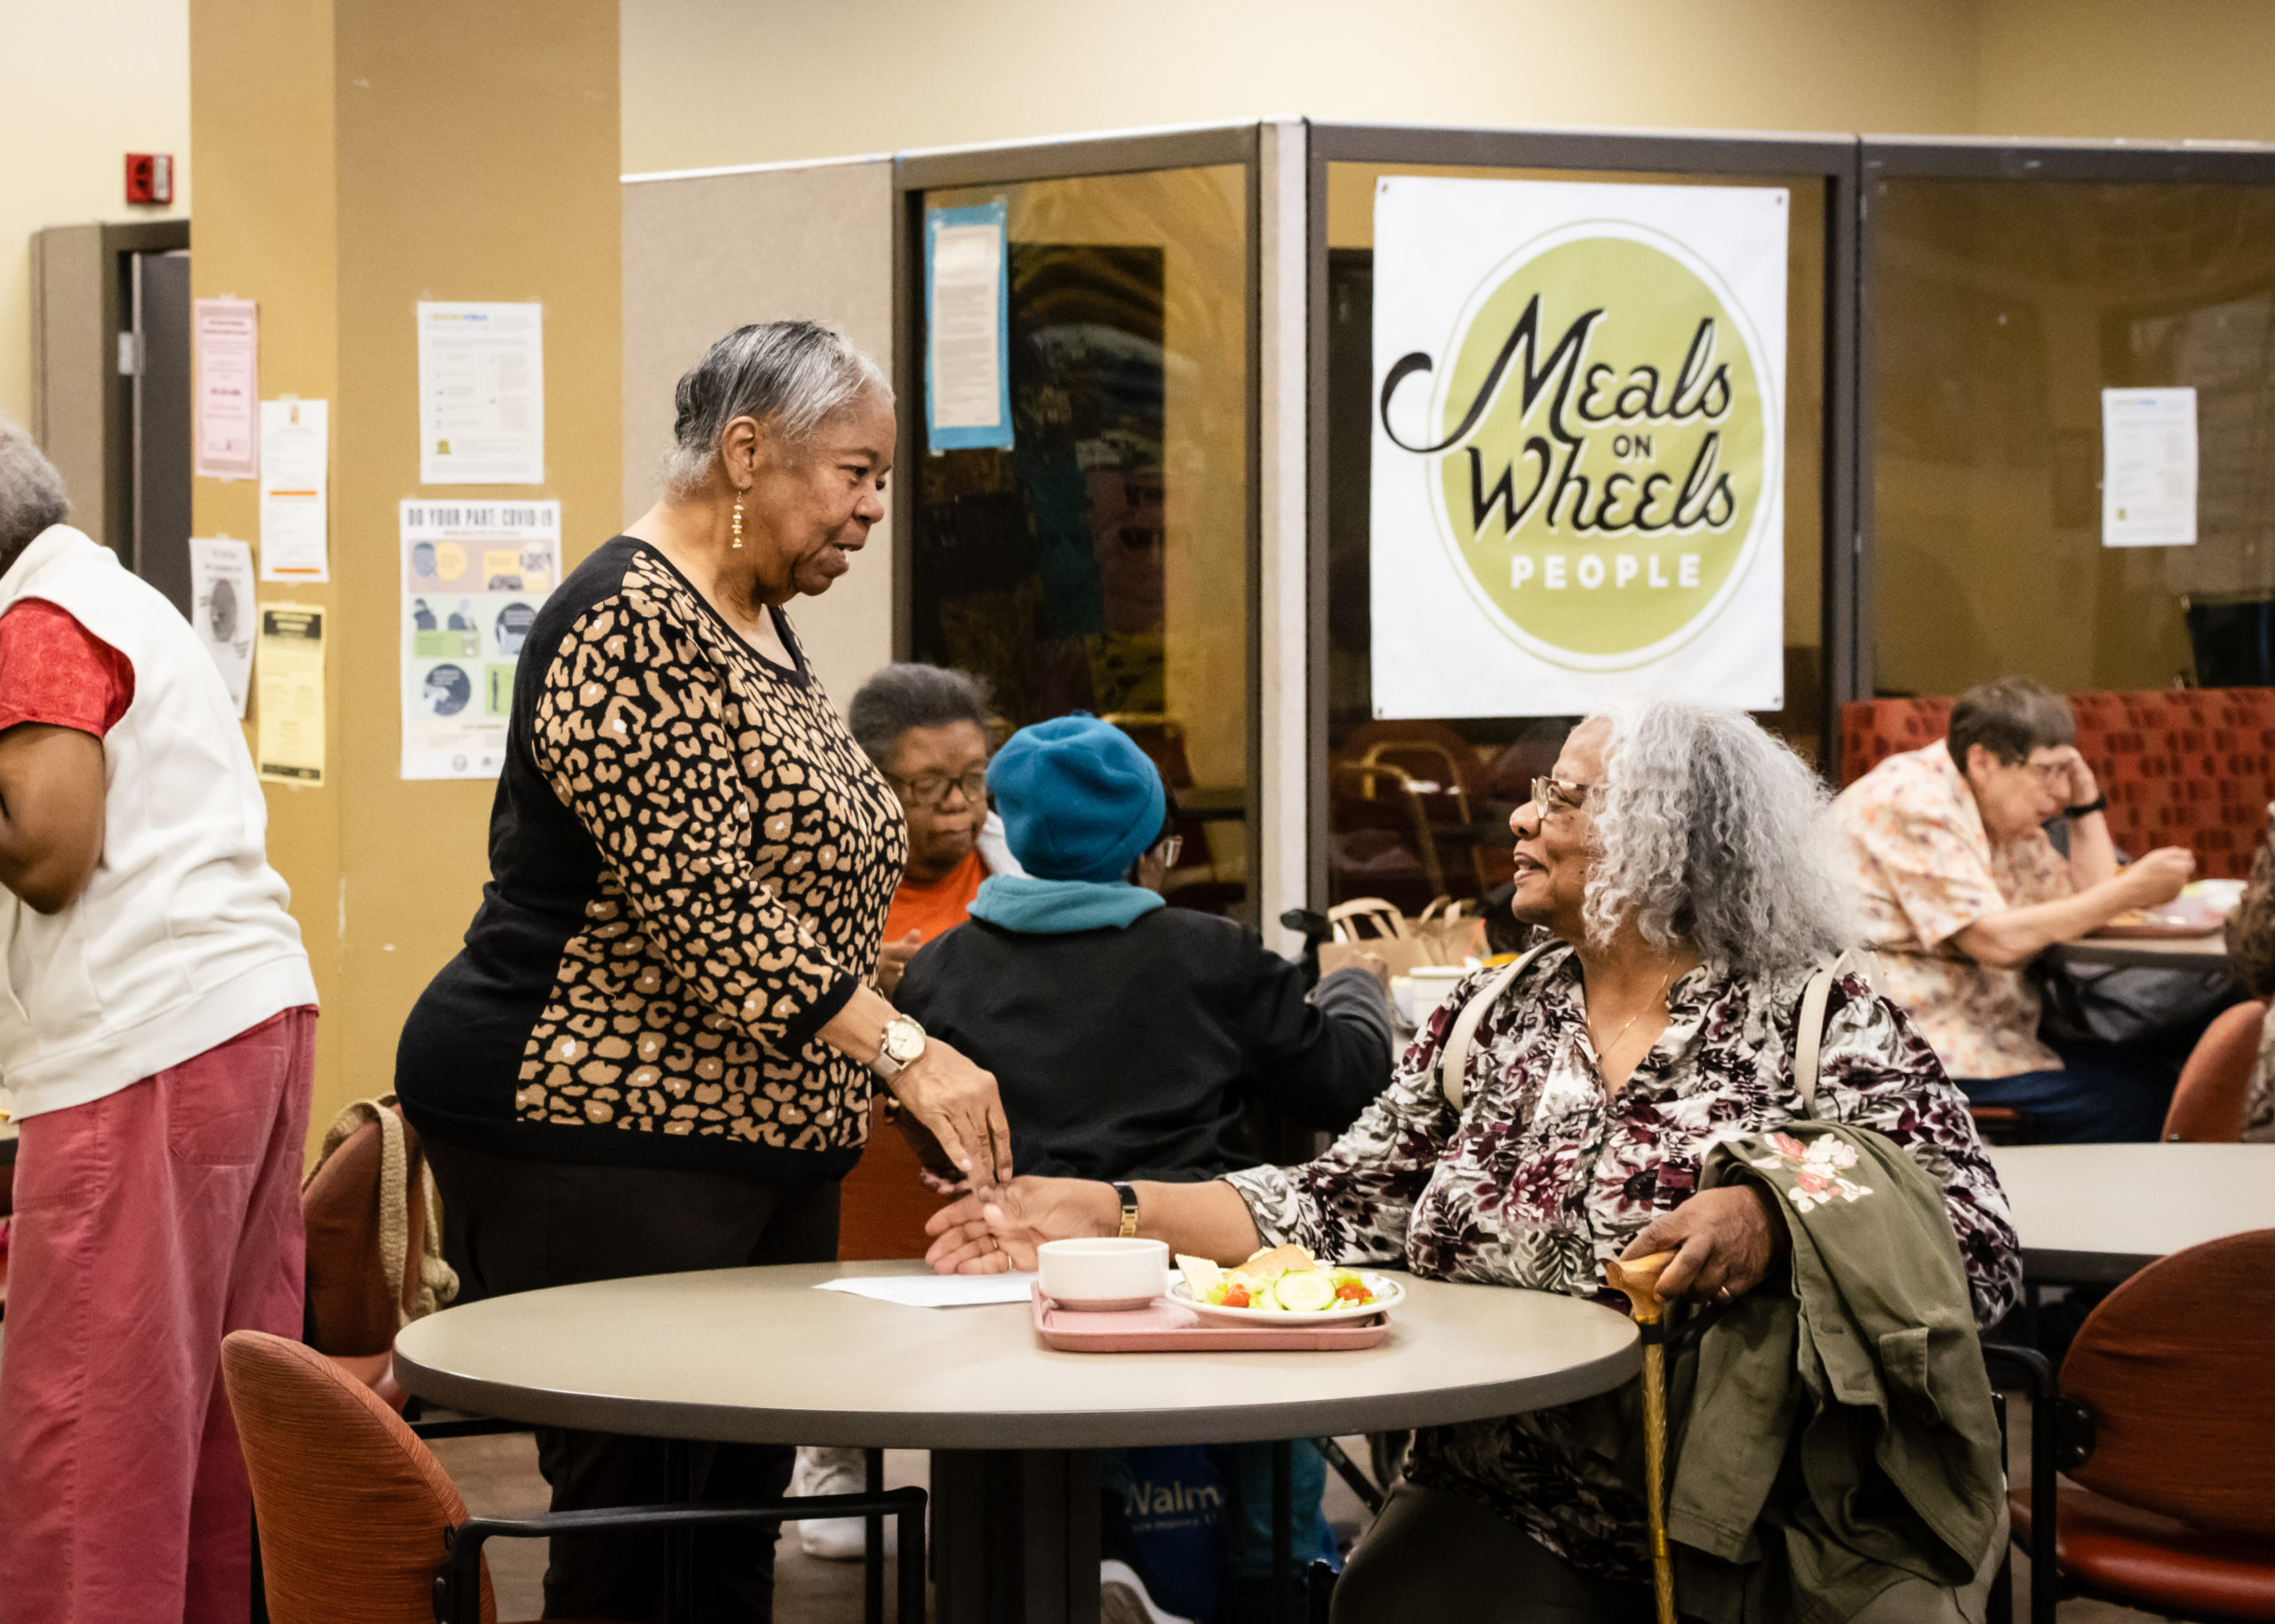 Diners connect at Meals on Wheels People's MLK Center during congregate lunch